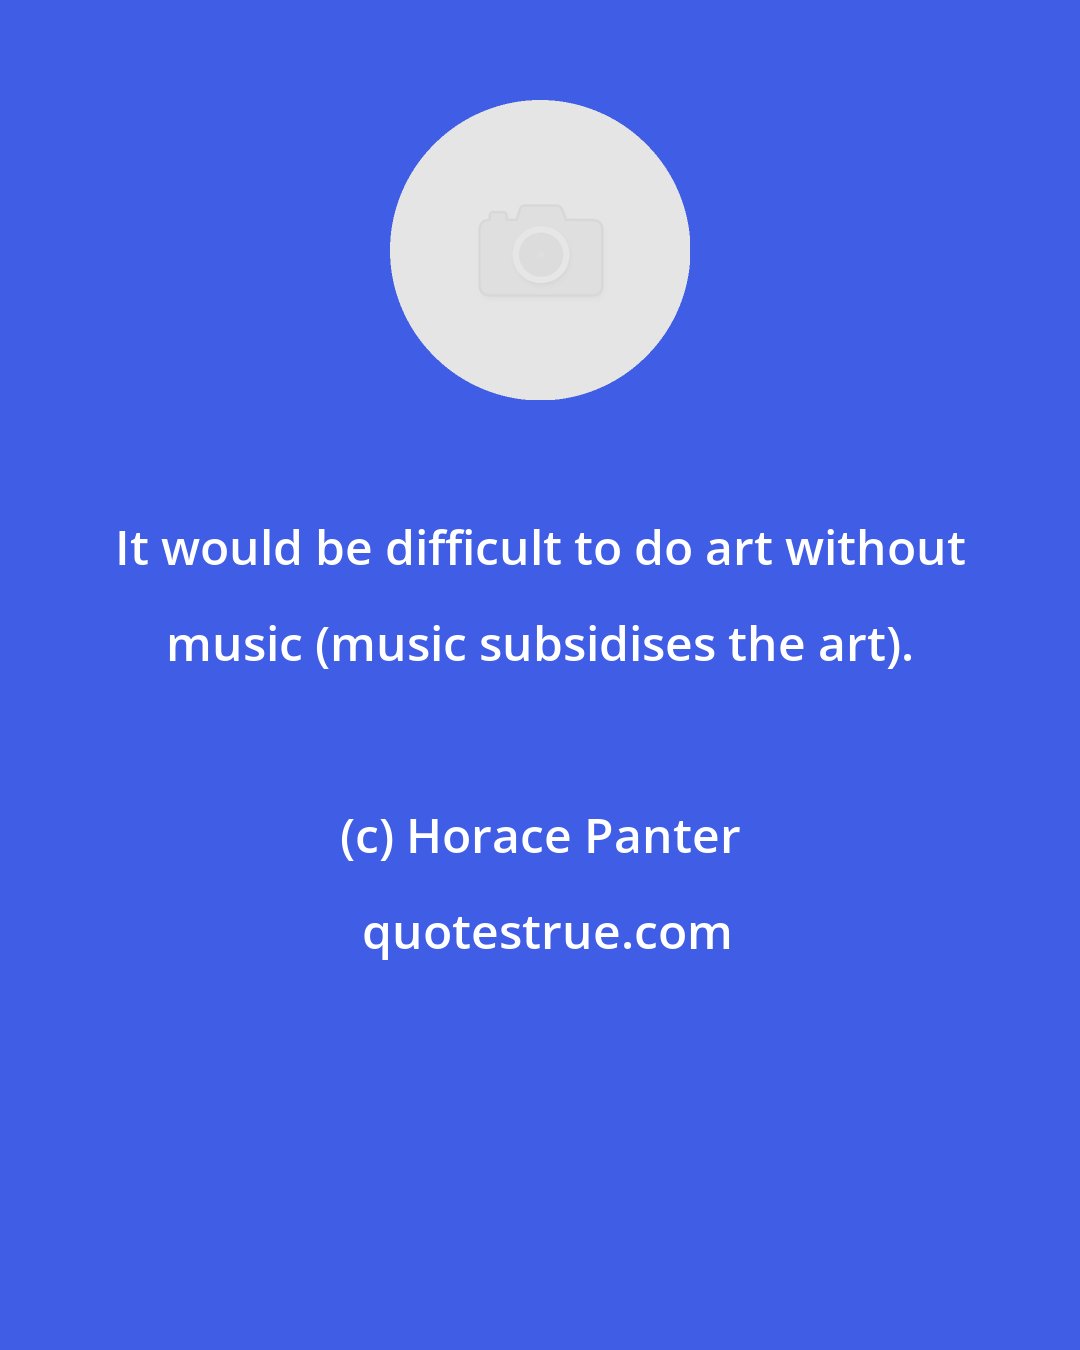 Horace Panter: It would be difficult to do art without music (music subsidises the art).